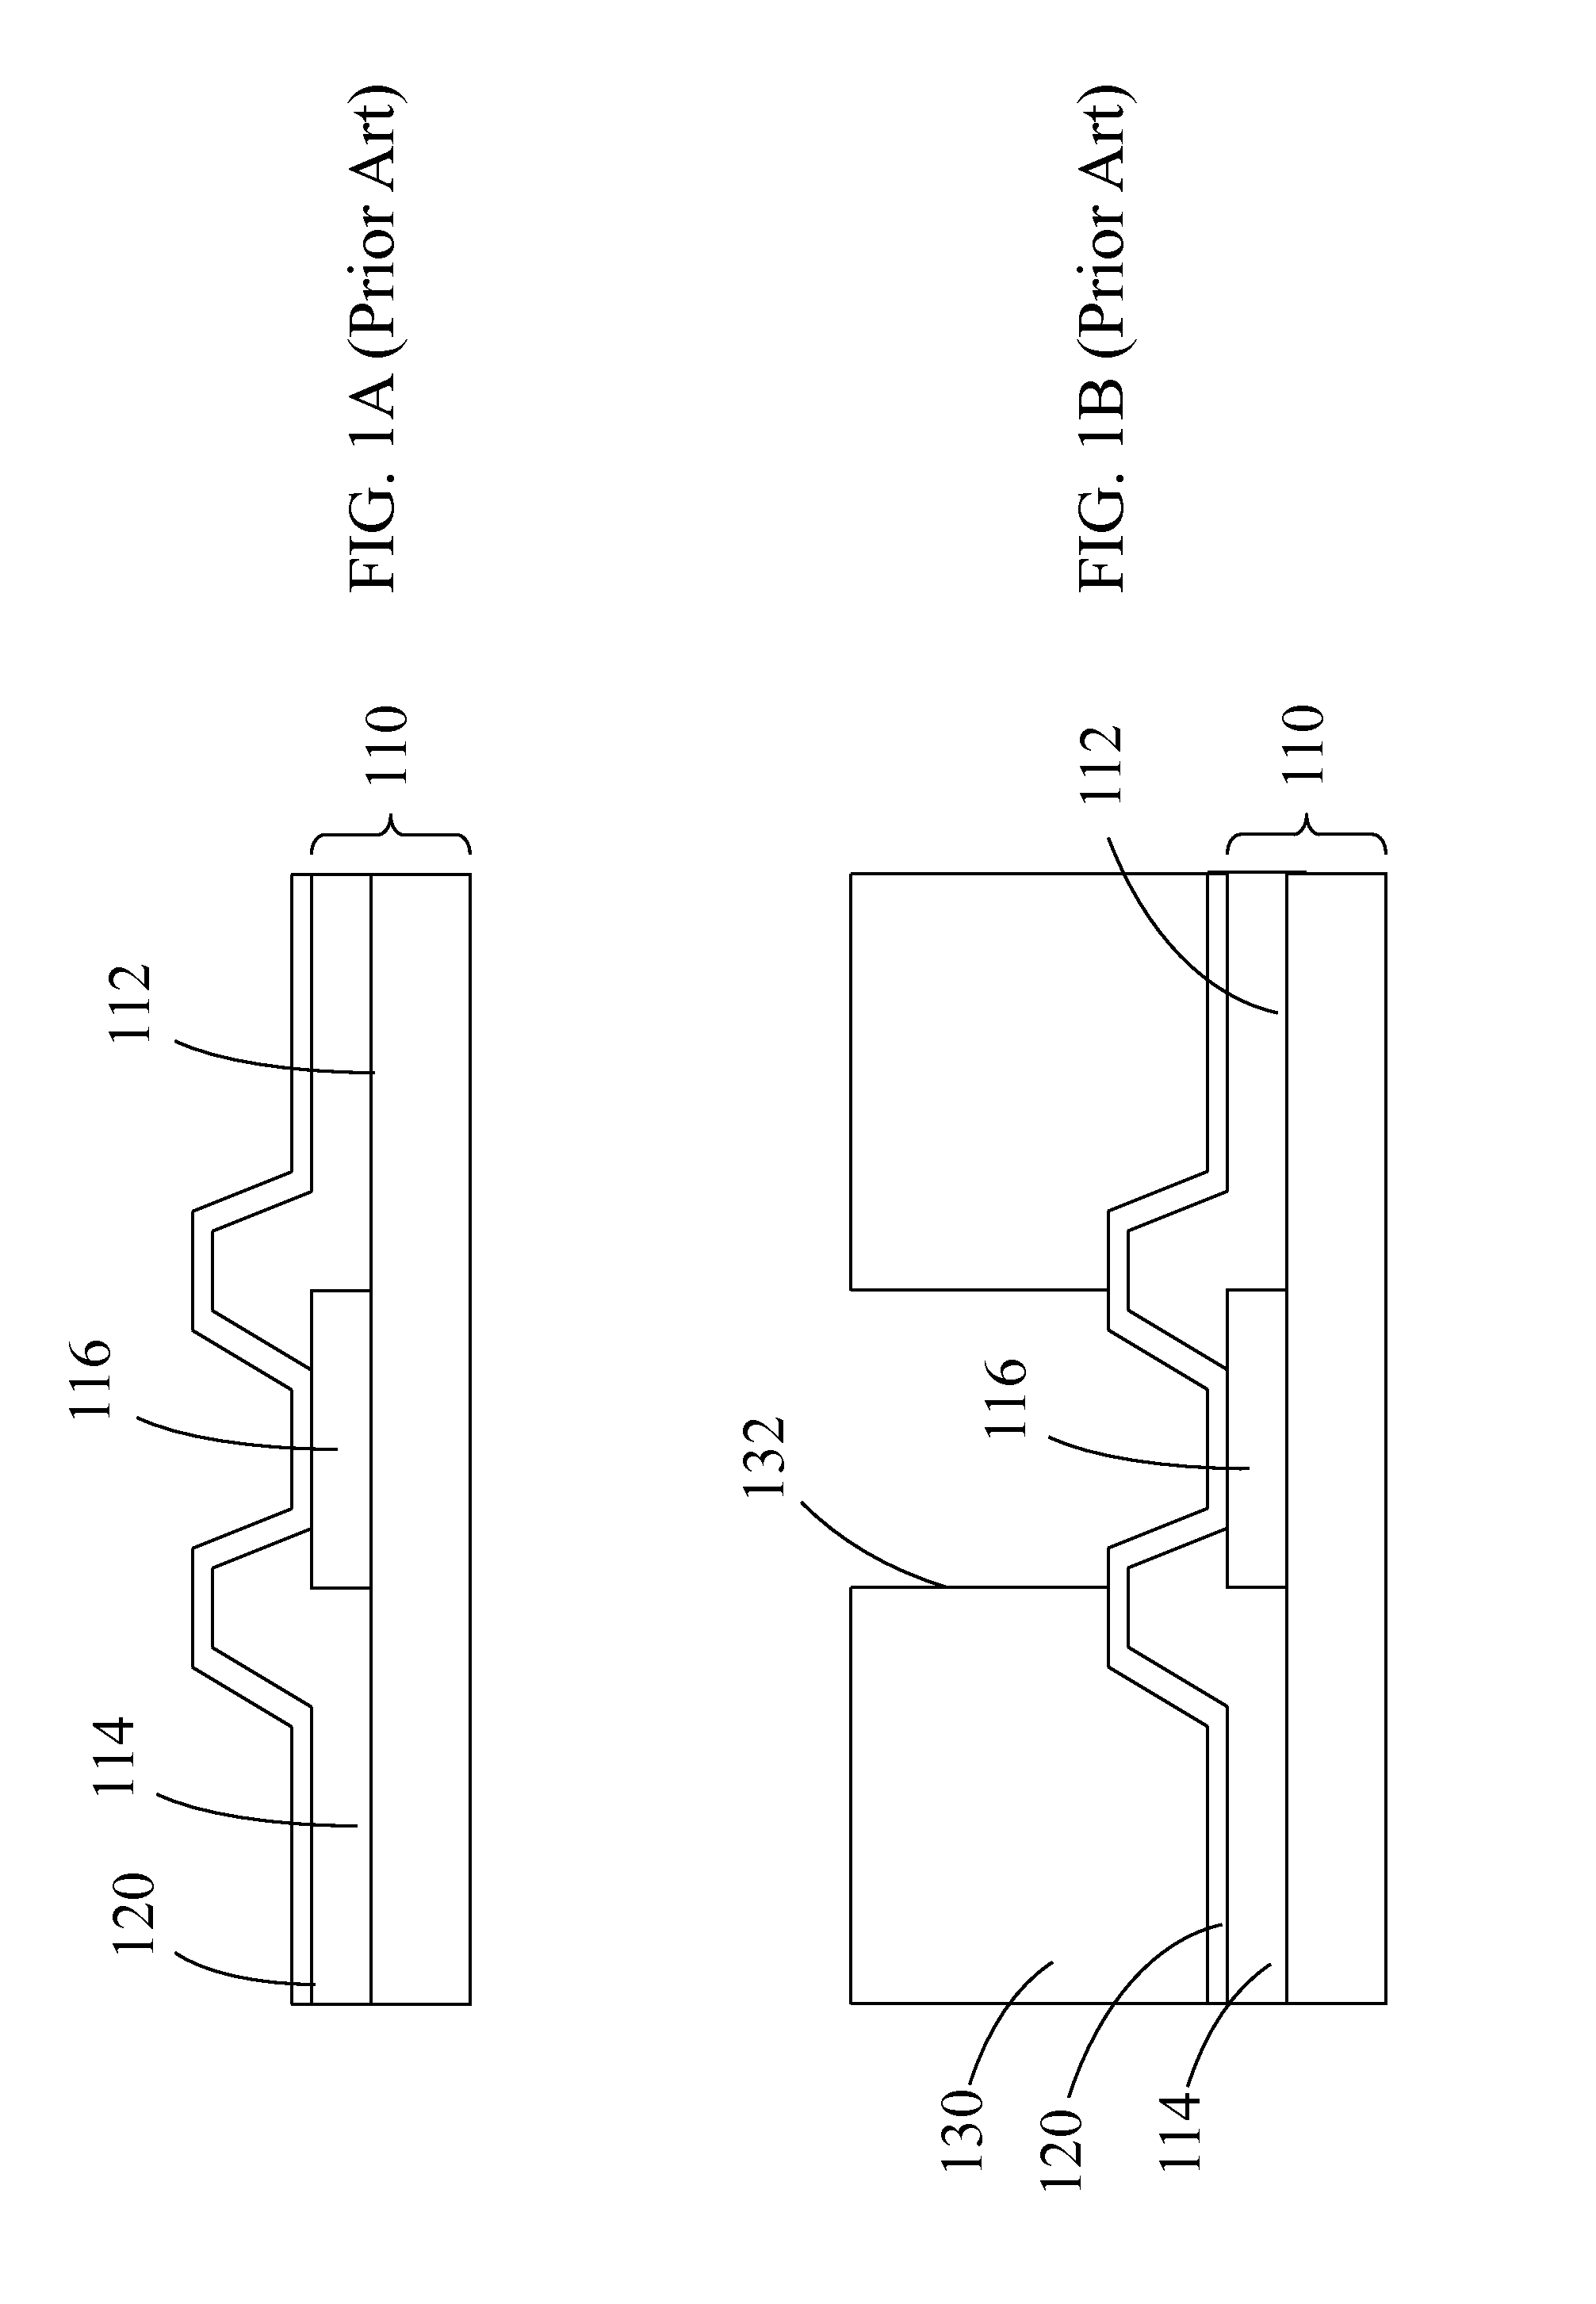 Solder cap bump in semiconductor package and method of manufacturing the same